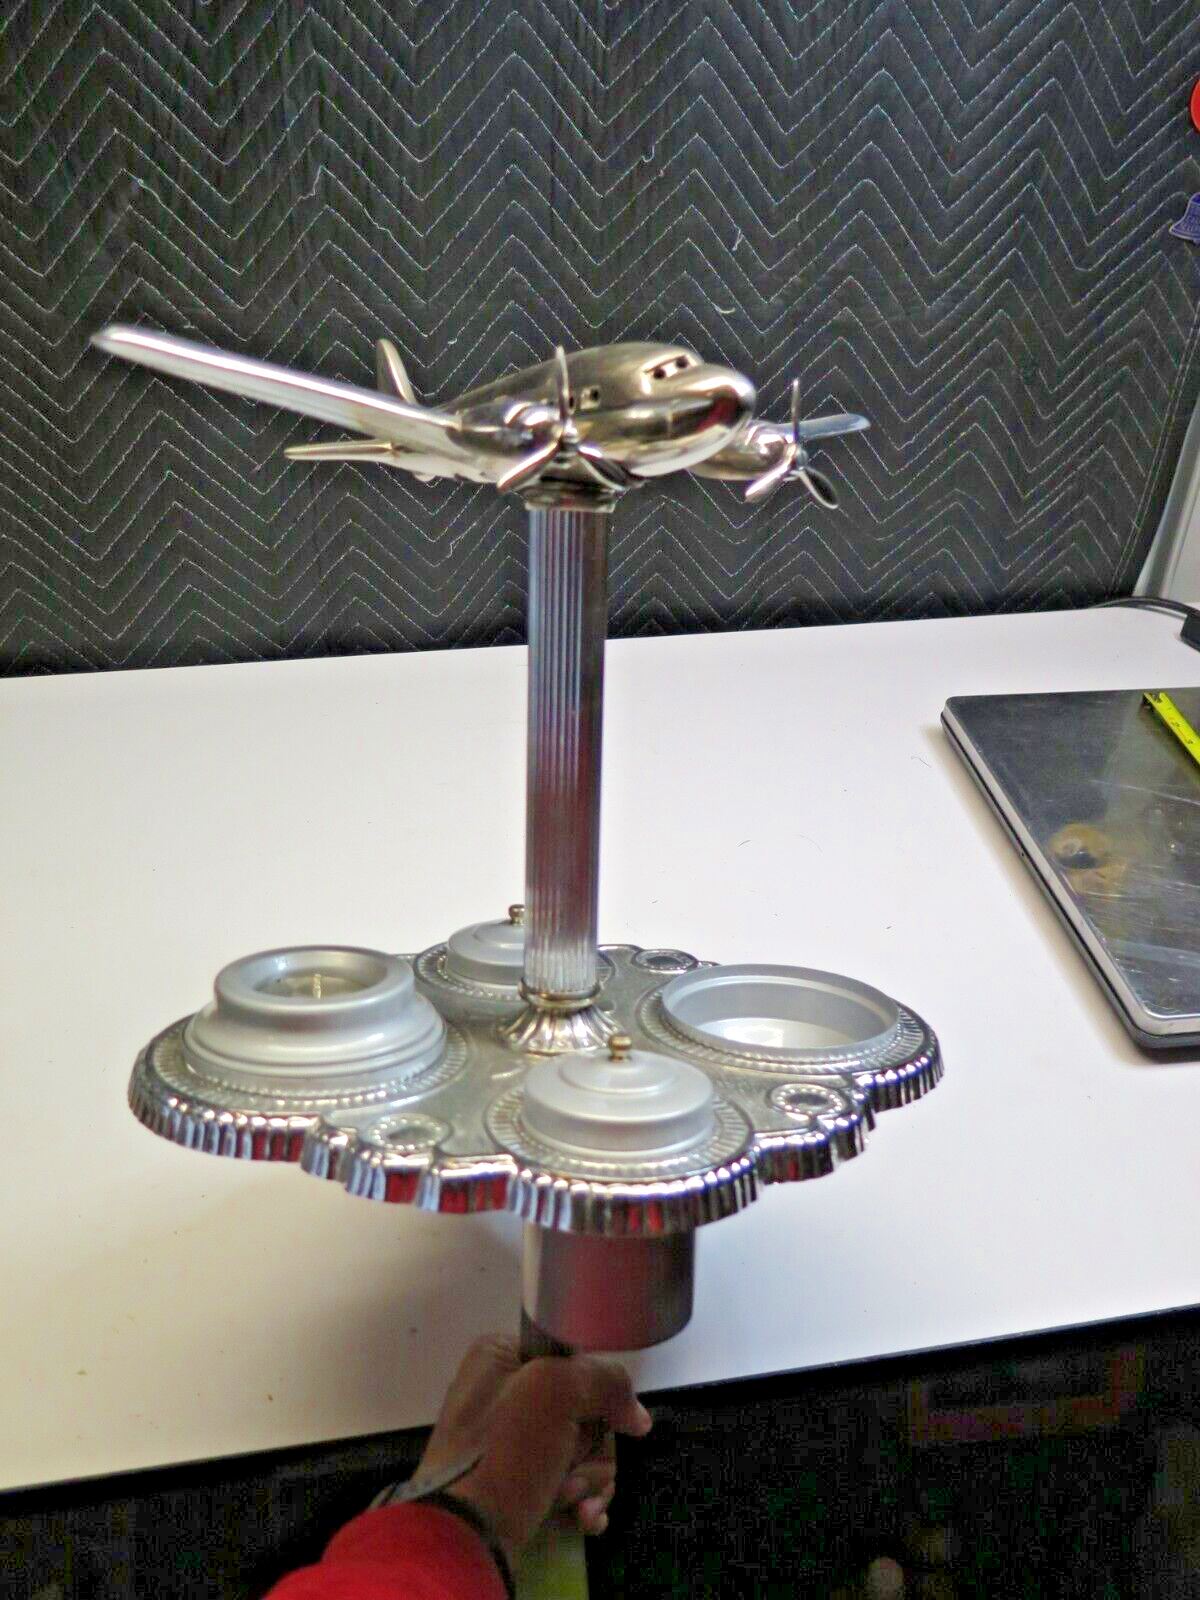 VINTAGE Art Deco Lighted Airplane DC3 Chrome Ashtray 1940s Table Tray Stand